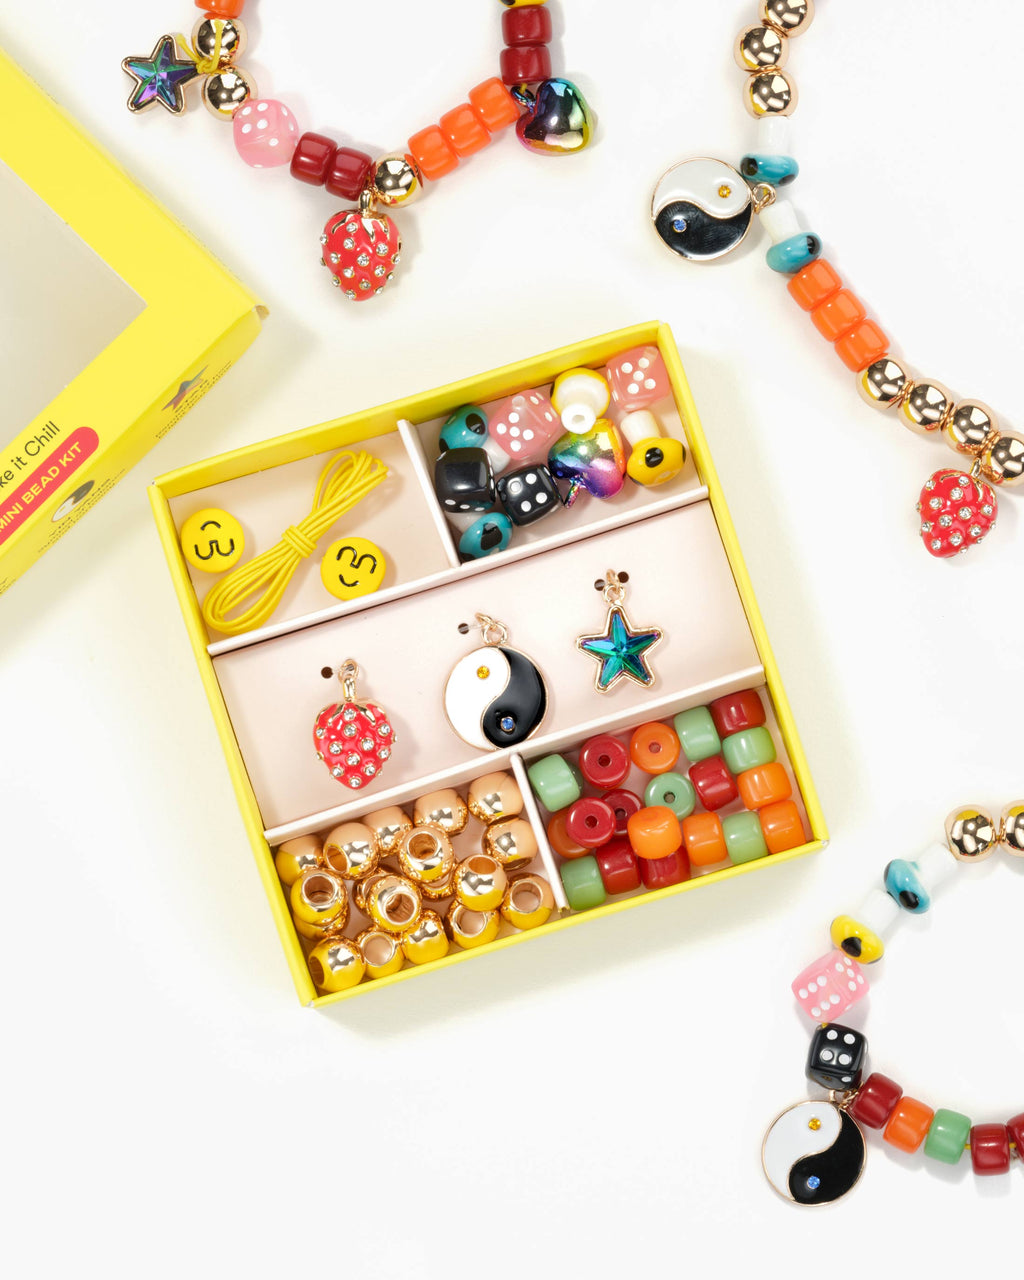 Kids Kit: Arm Candy! – The Bead Shop